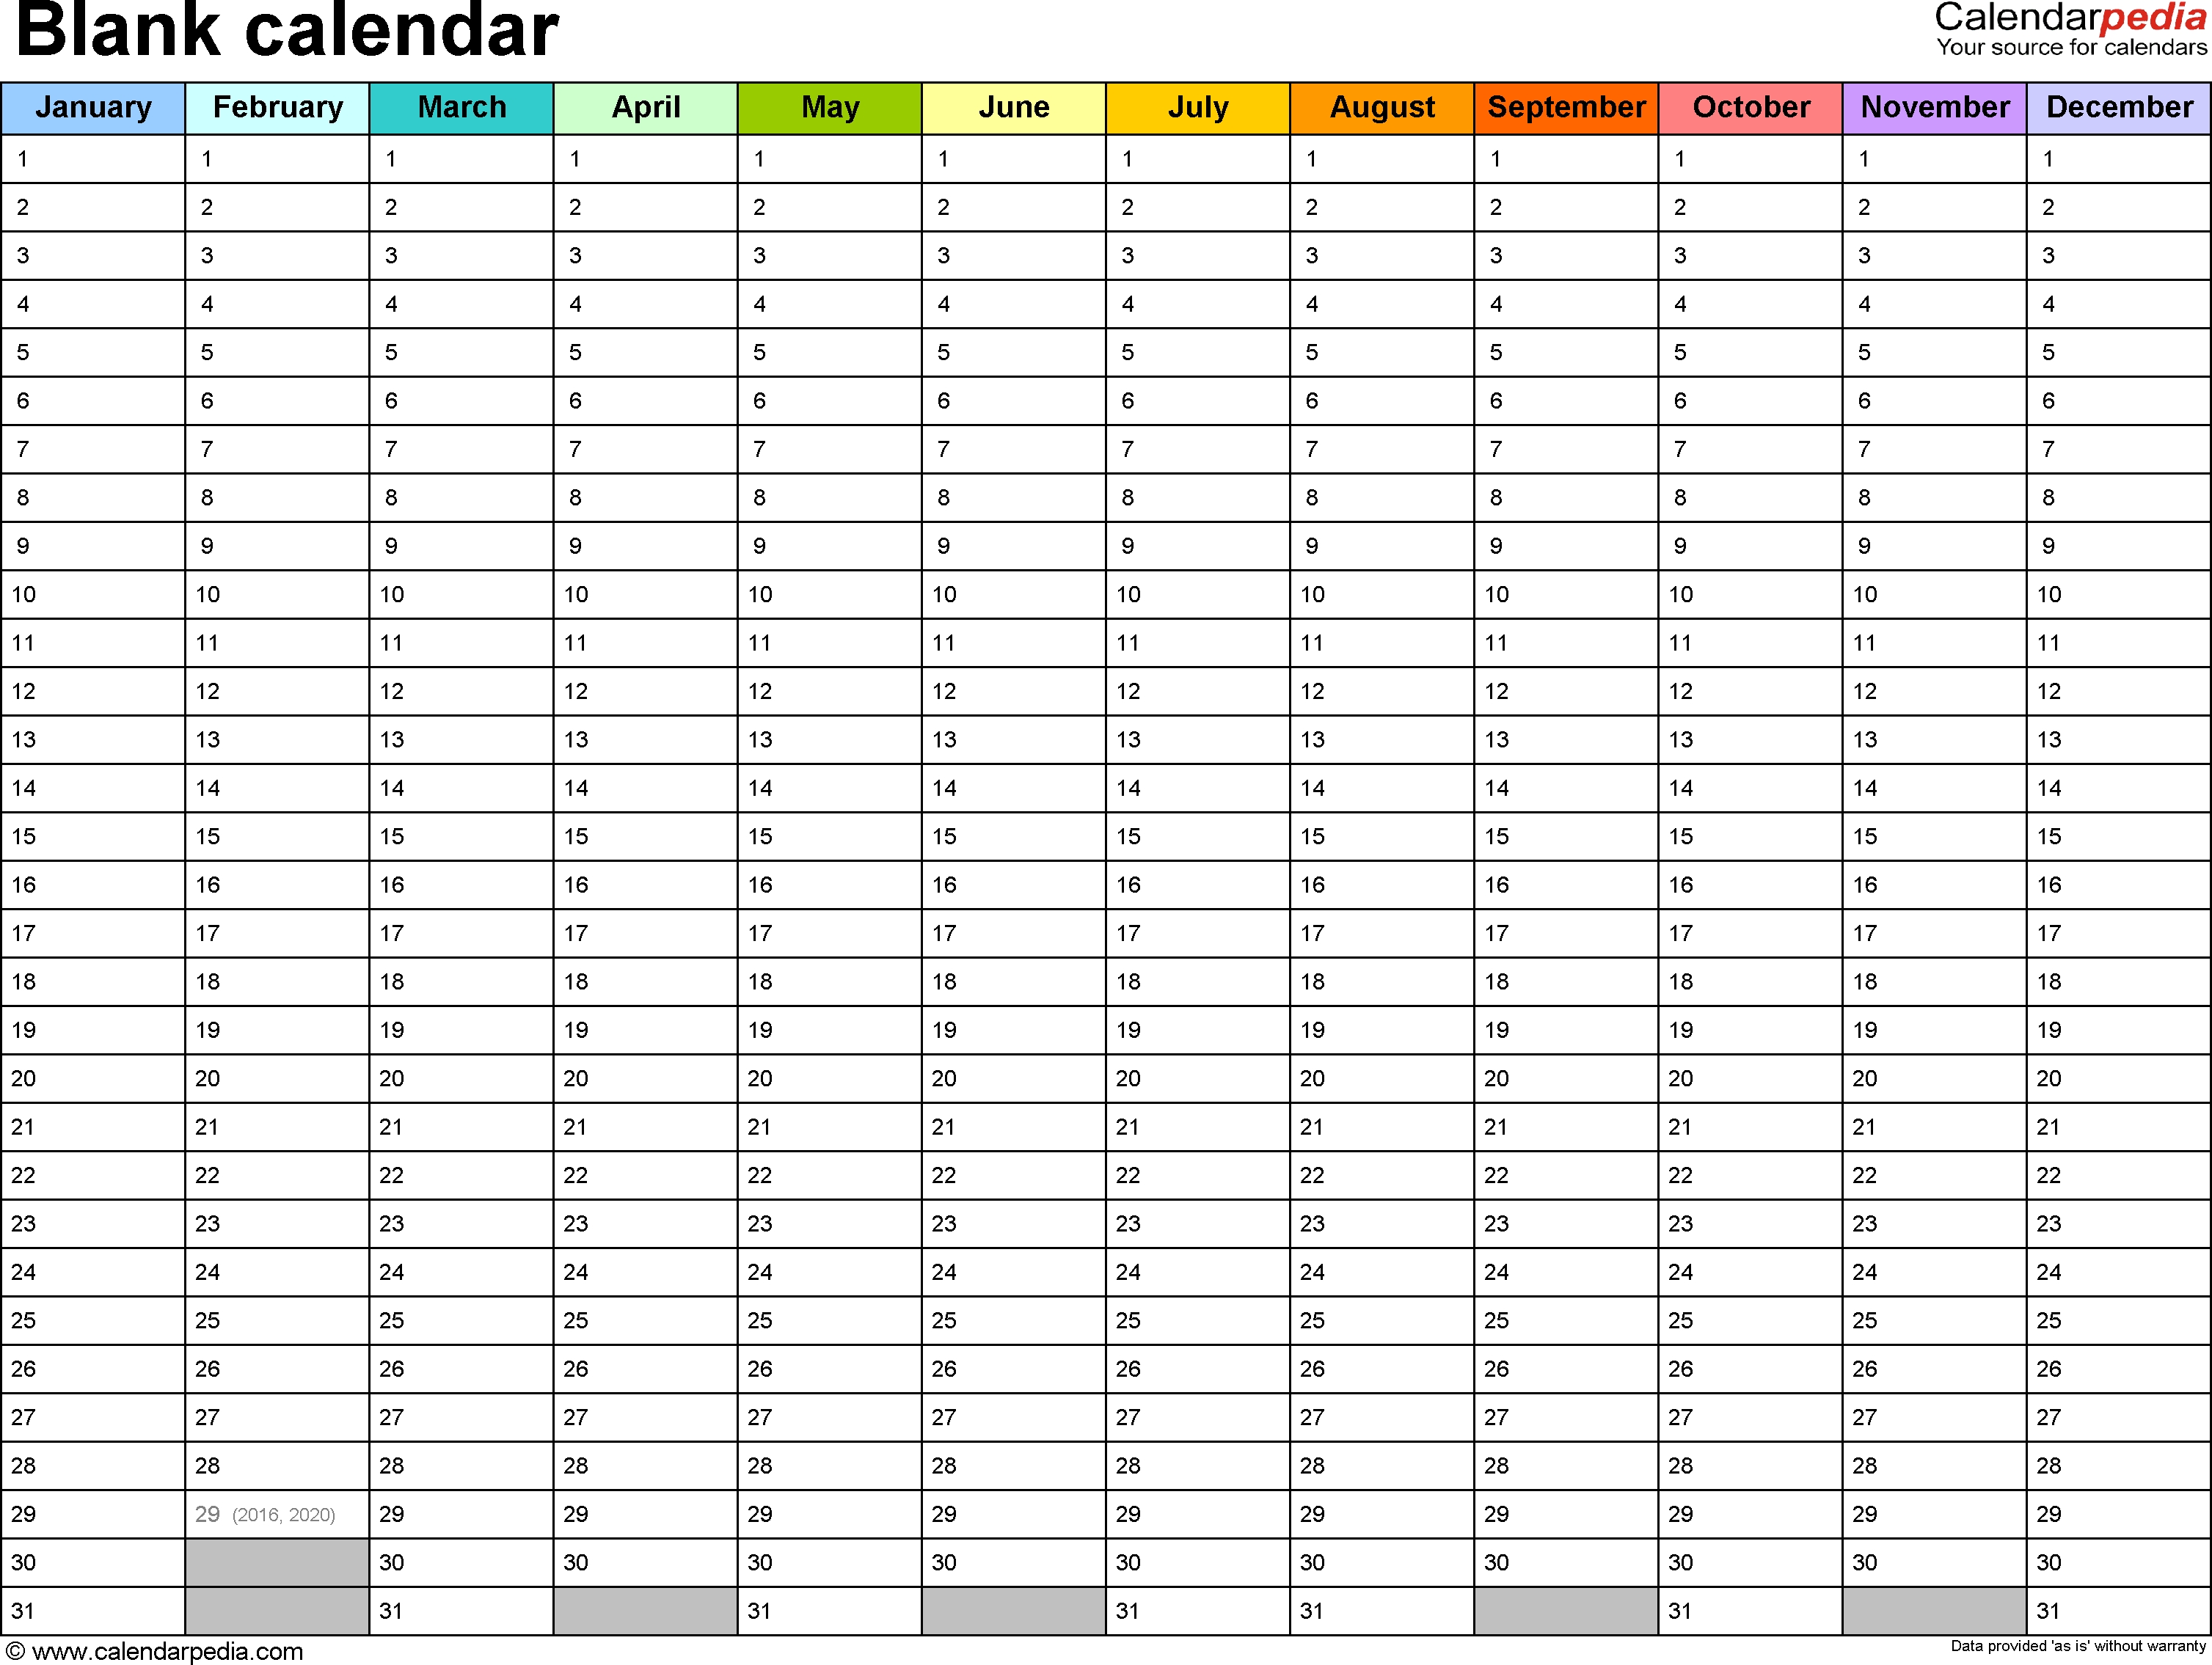 Blank Calendar - 9 Free Printable Microsoft Word Templates inside Schedule At A Glance Template